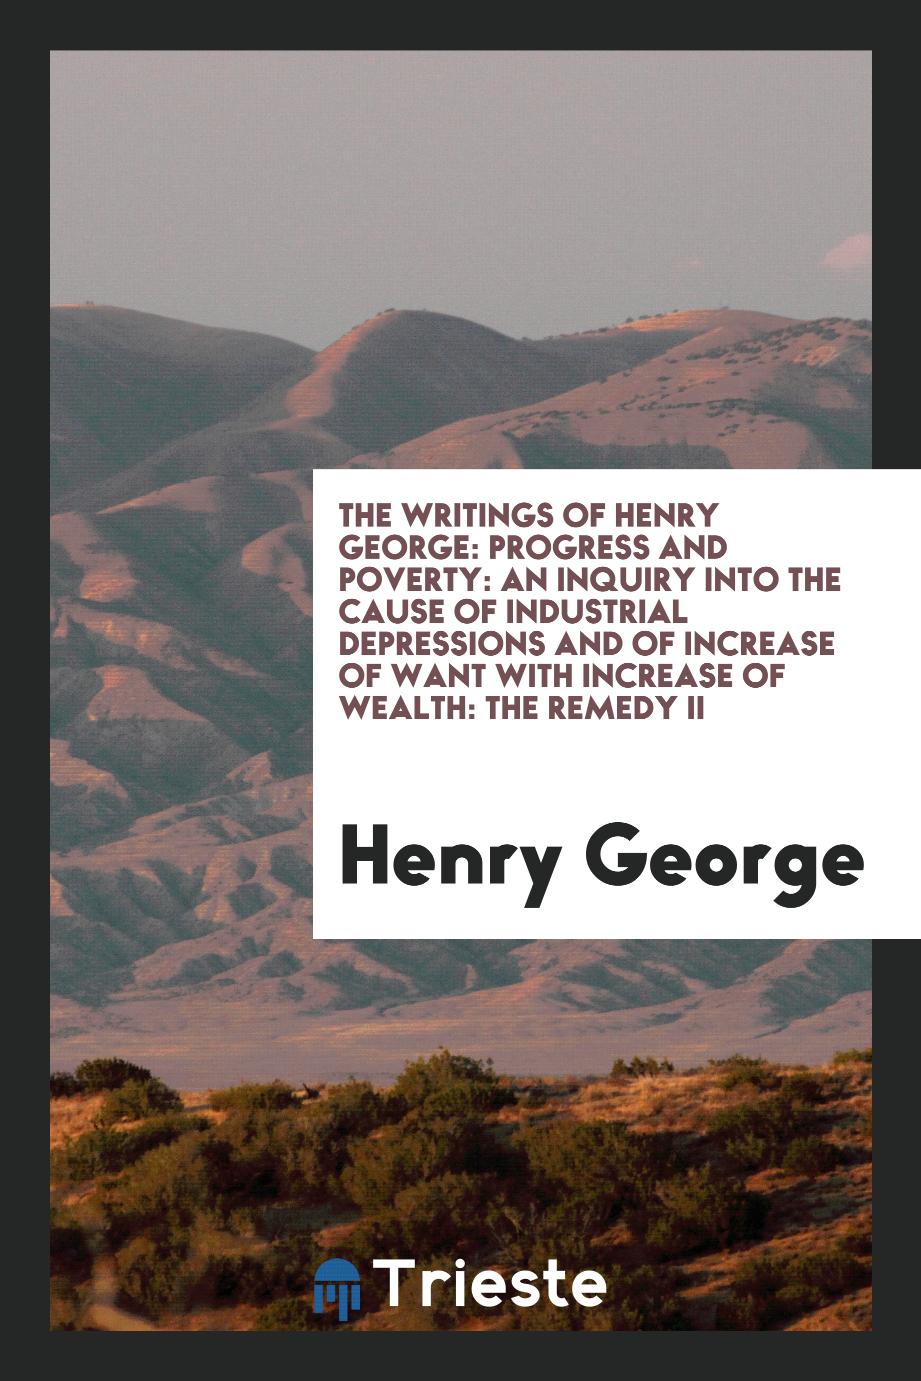 The writings of Henry George: Progress and poverty: An inquiry into the cause of industrial depressions and of increase of want with increase of wealth: The remedy II